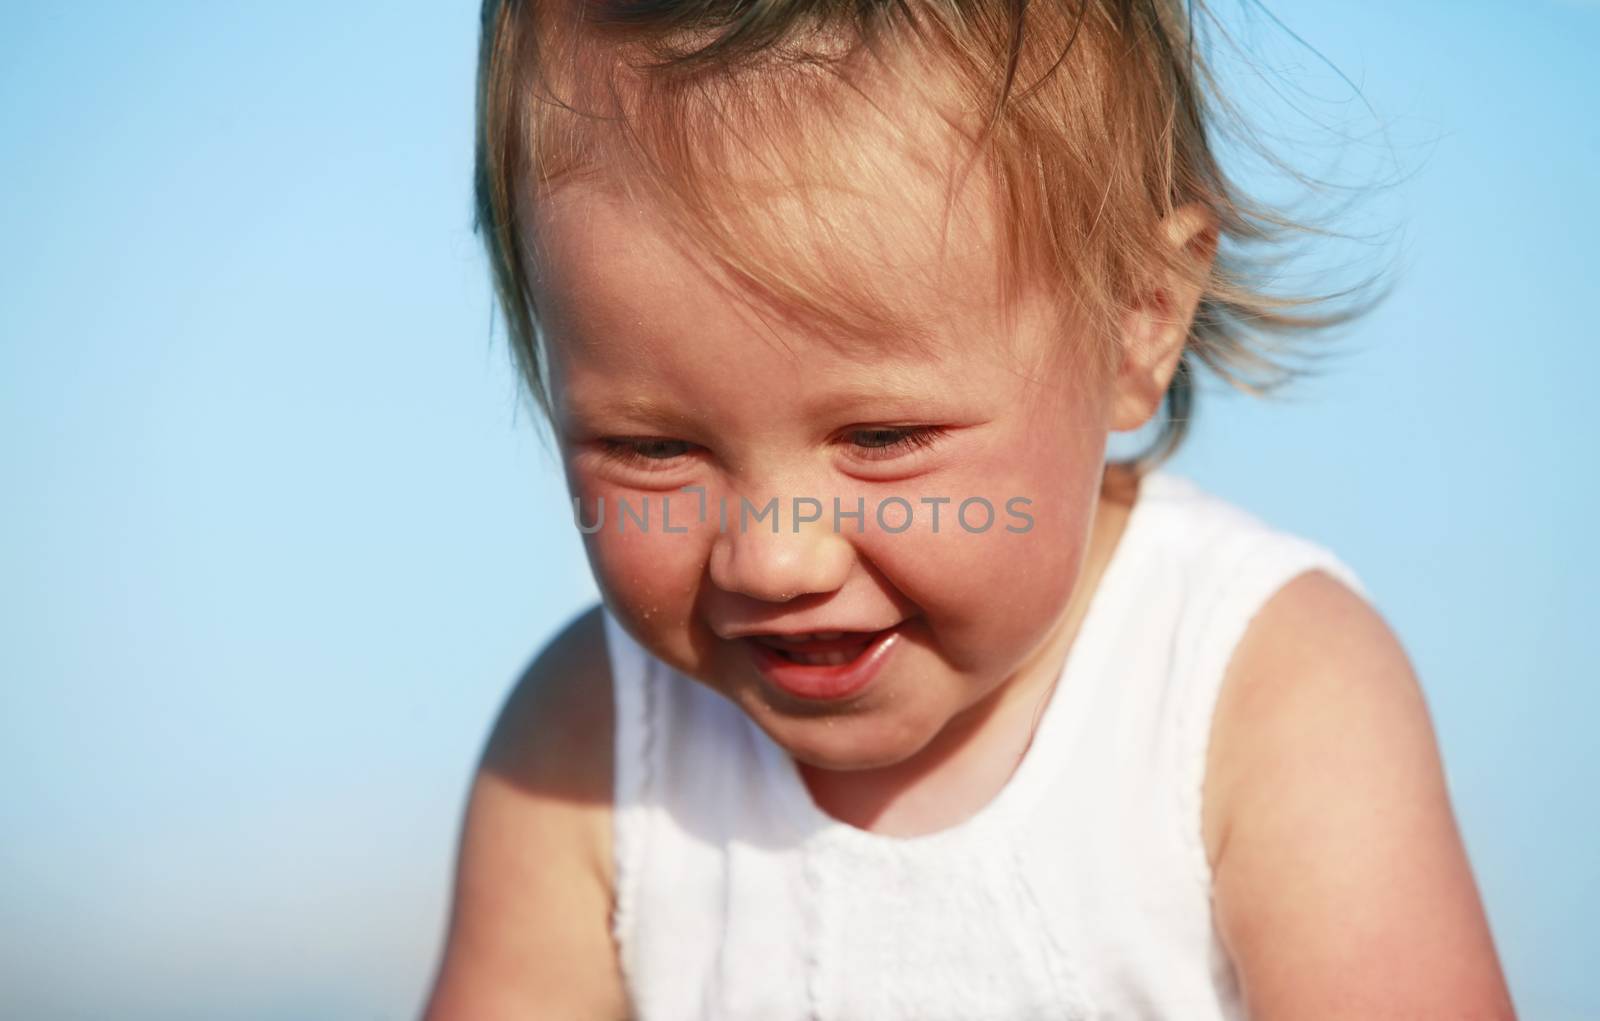 Little girl laughing in the background of blue sky